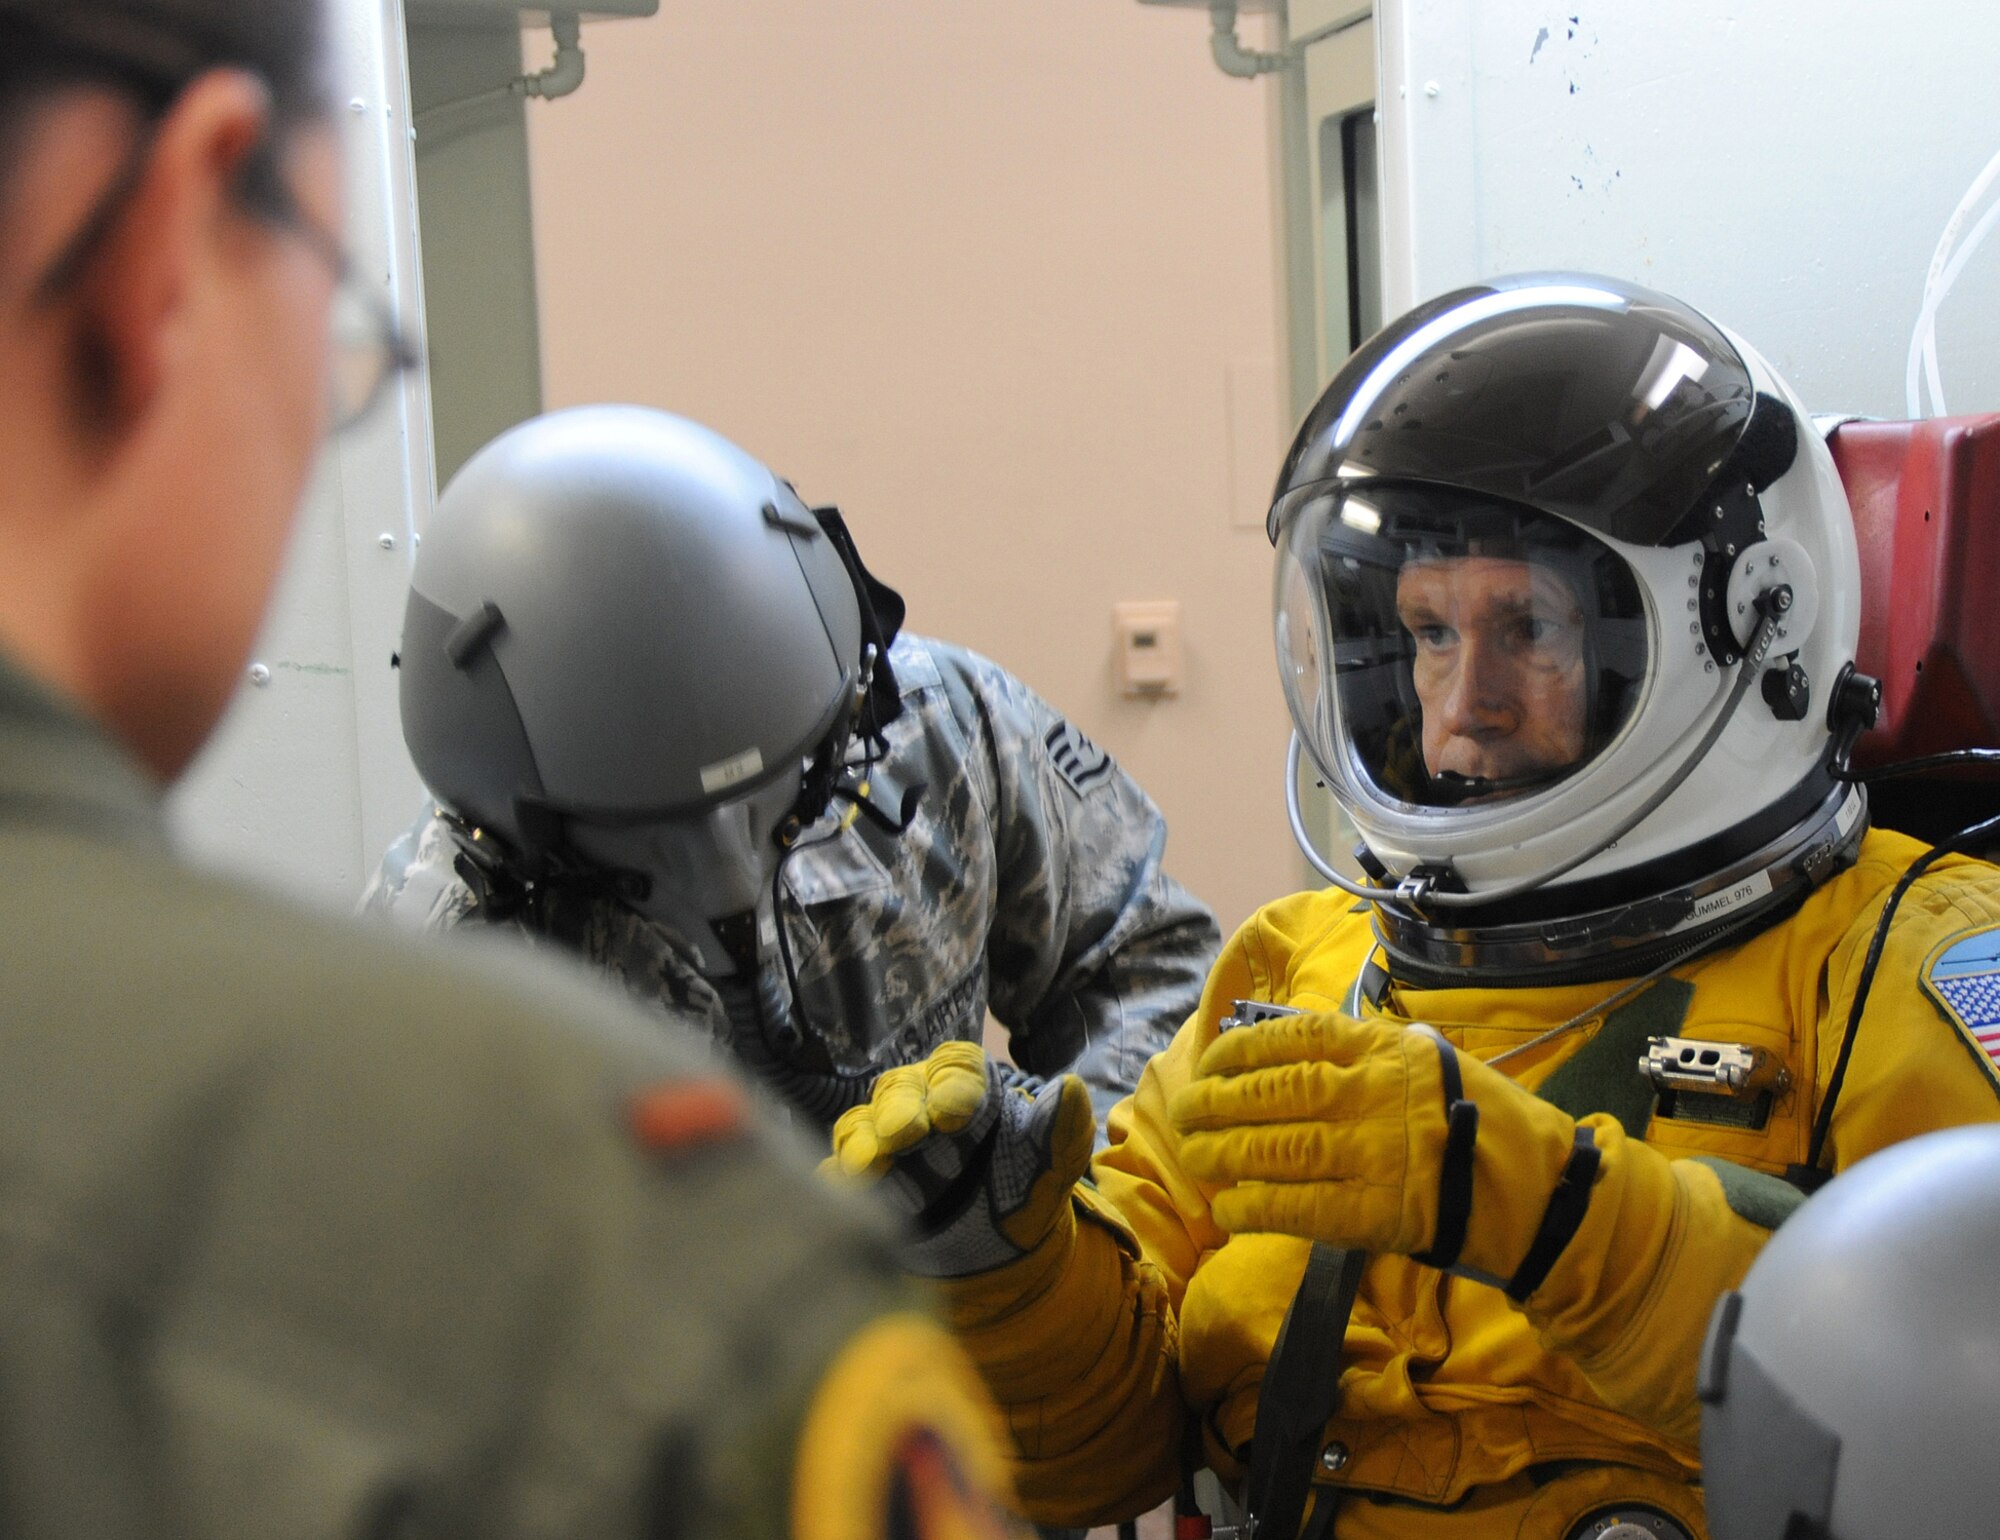 Gen. William M. Fraser III, commander of Air Combat Command, gets strapped into the high-altitude chamber at Beale Air Force Base, Calif., Jan. 10 for a decompression test. The chamber session familiarized the general with the pressure suit and flying at high altitudes. (U.S. Air Force photo/9th Reconnaissance Wing Public Affairs)